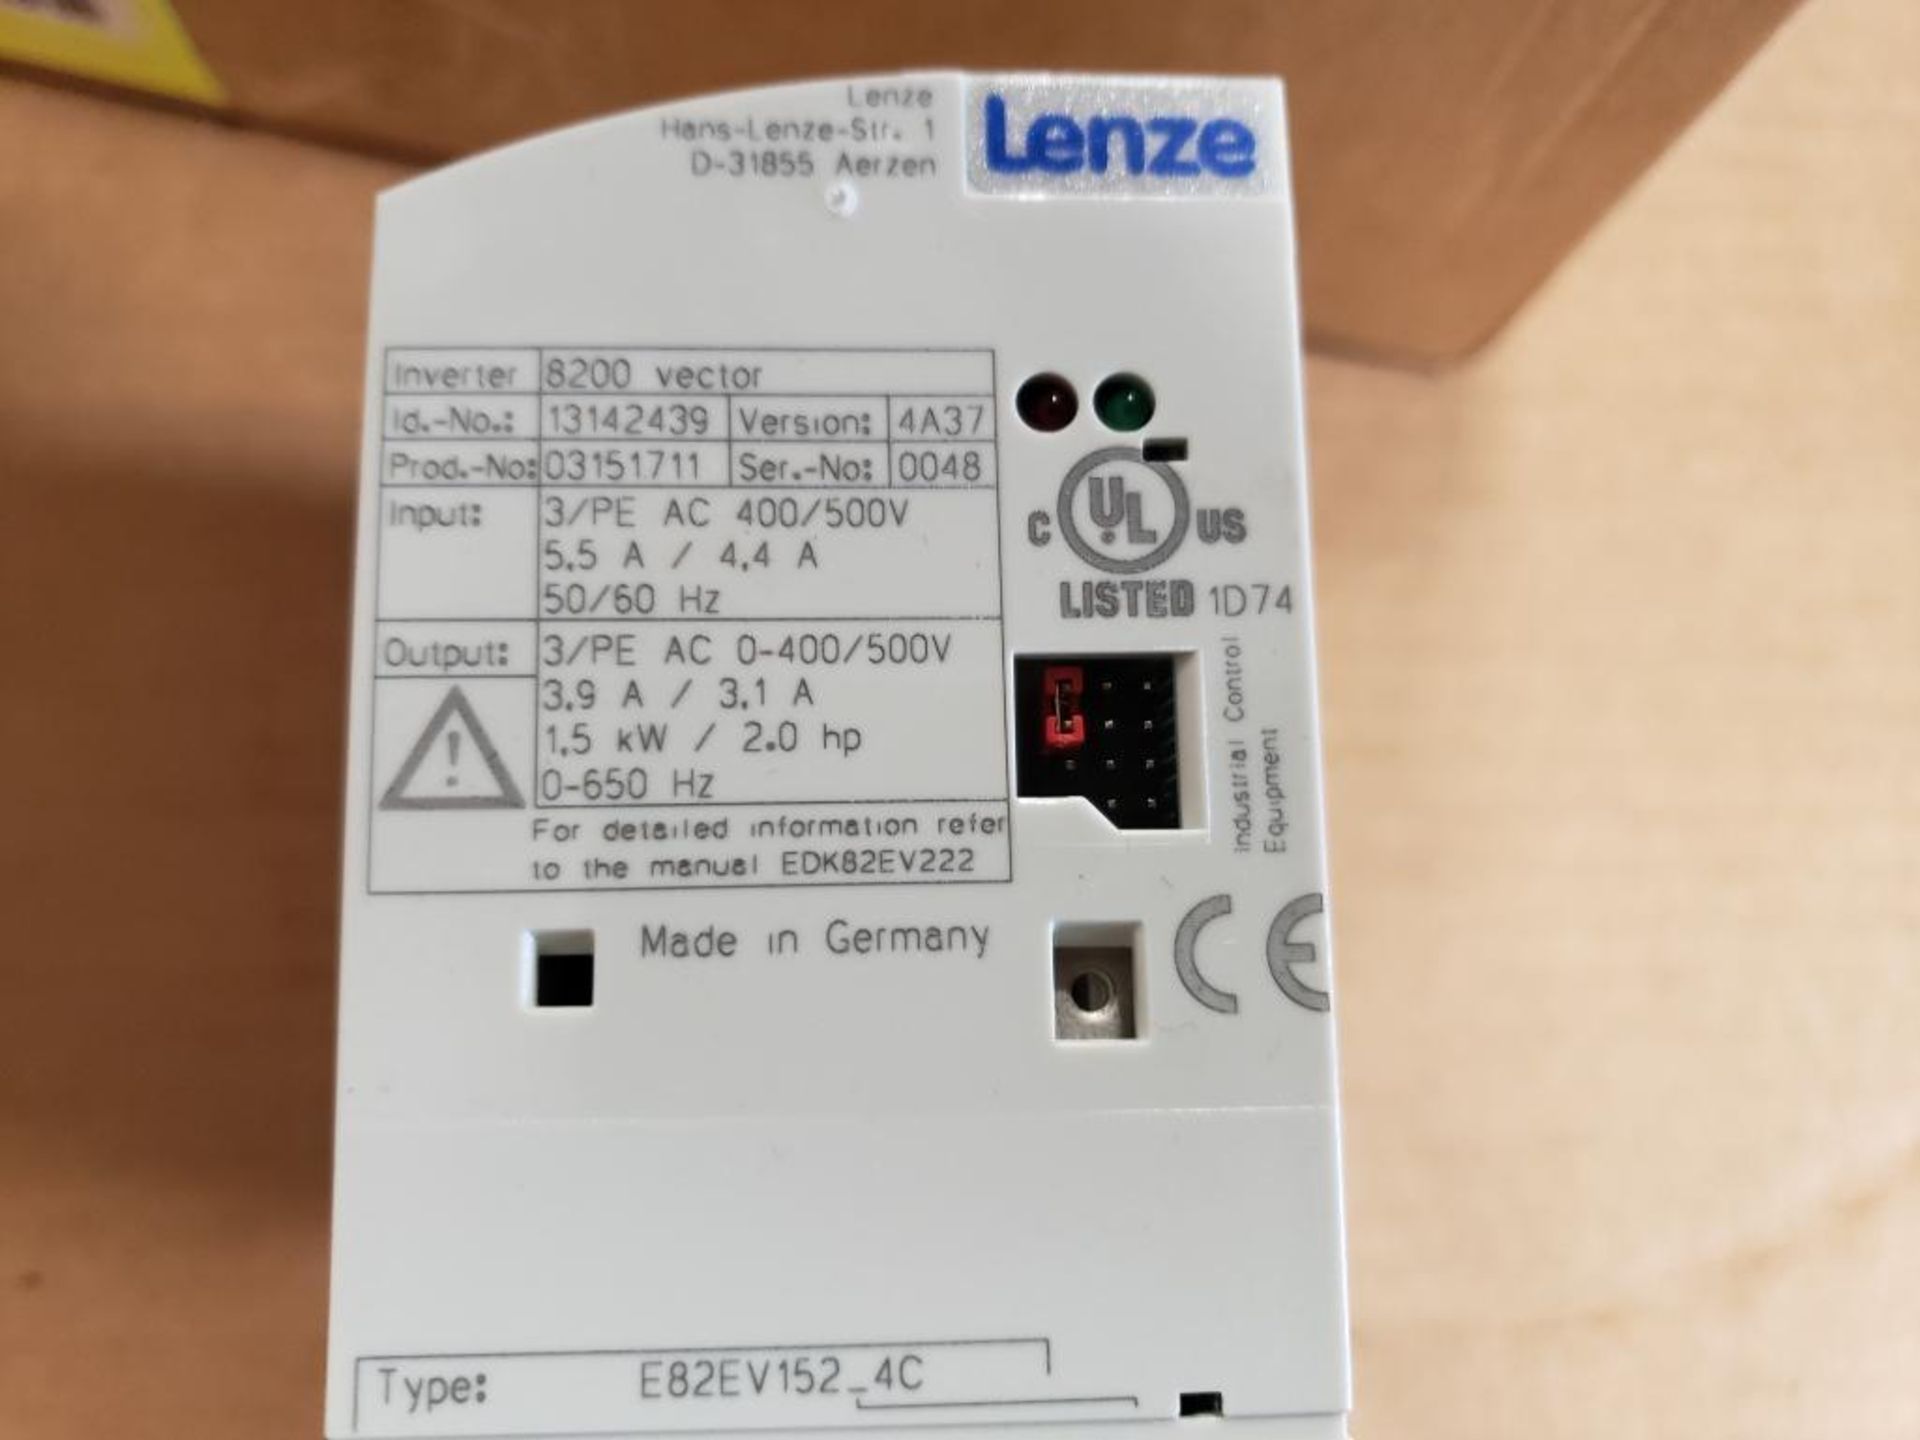 Lenze 8200 Vector drive 13142439. 3PH, 400/500V, 1.5kW, 2HP. - Image 5 of 7